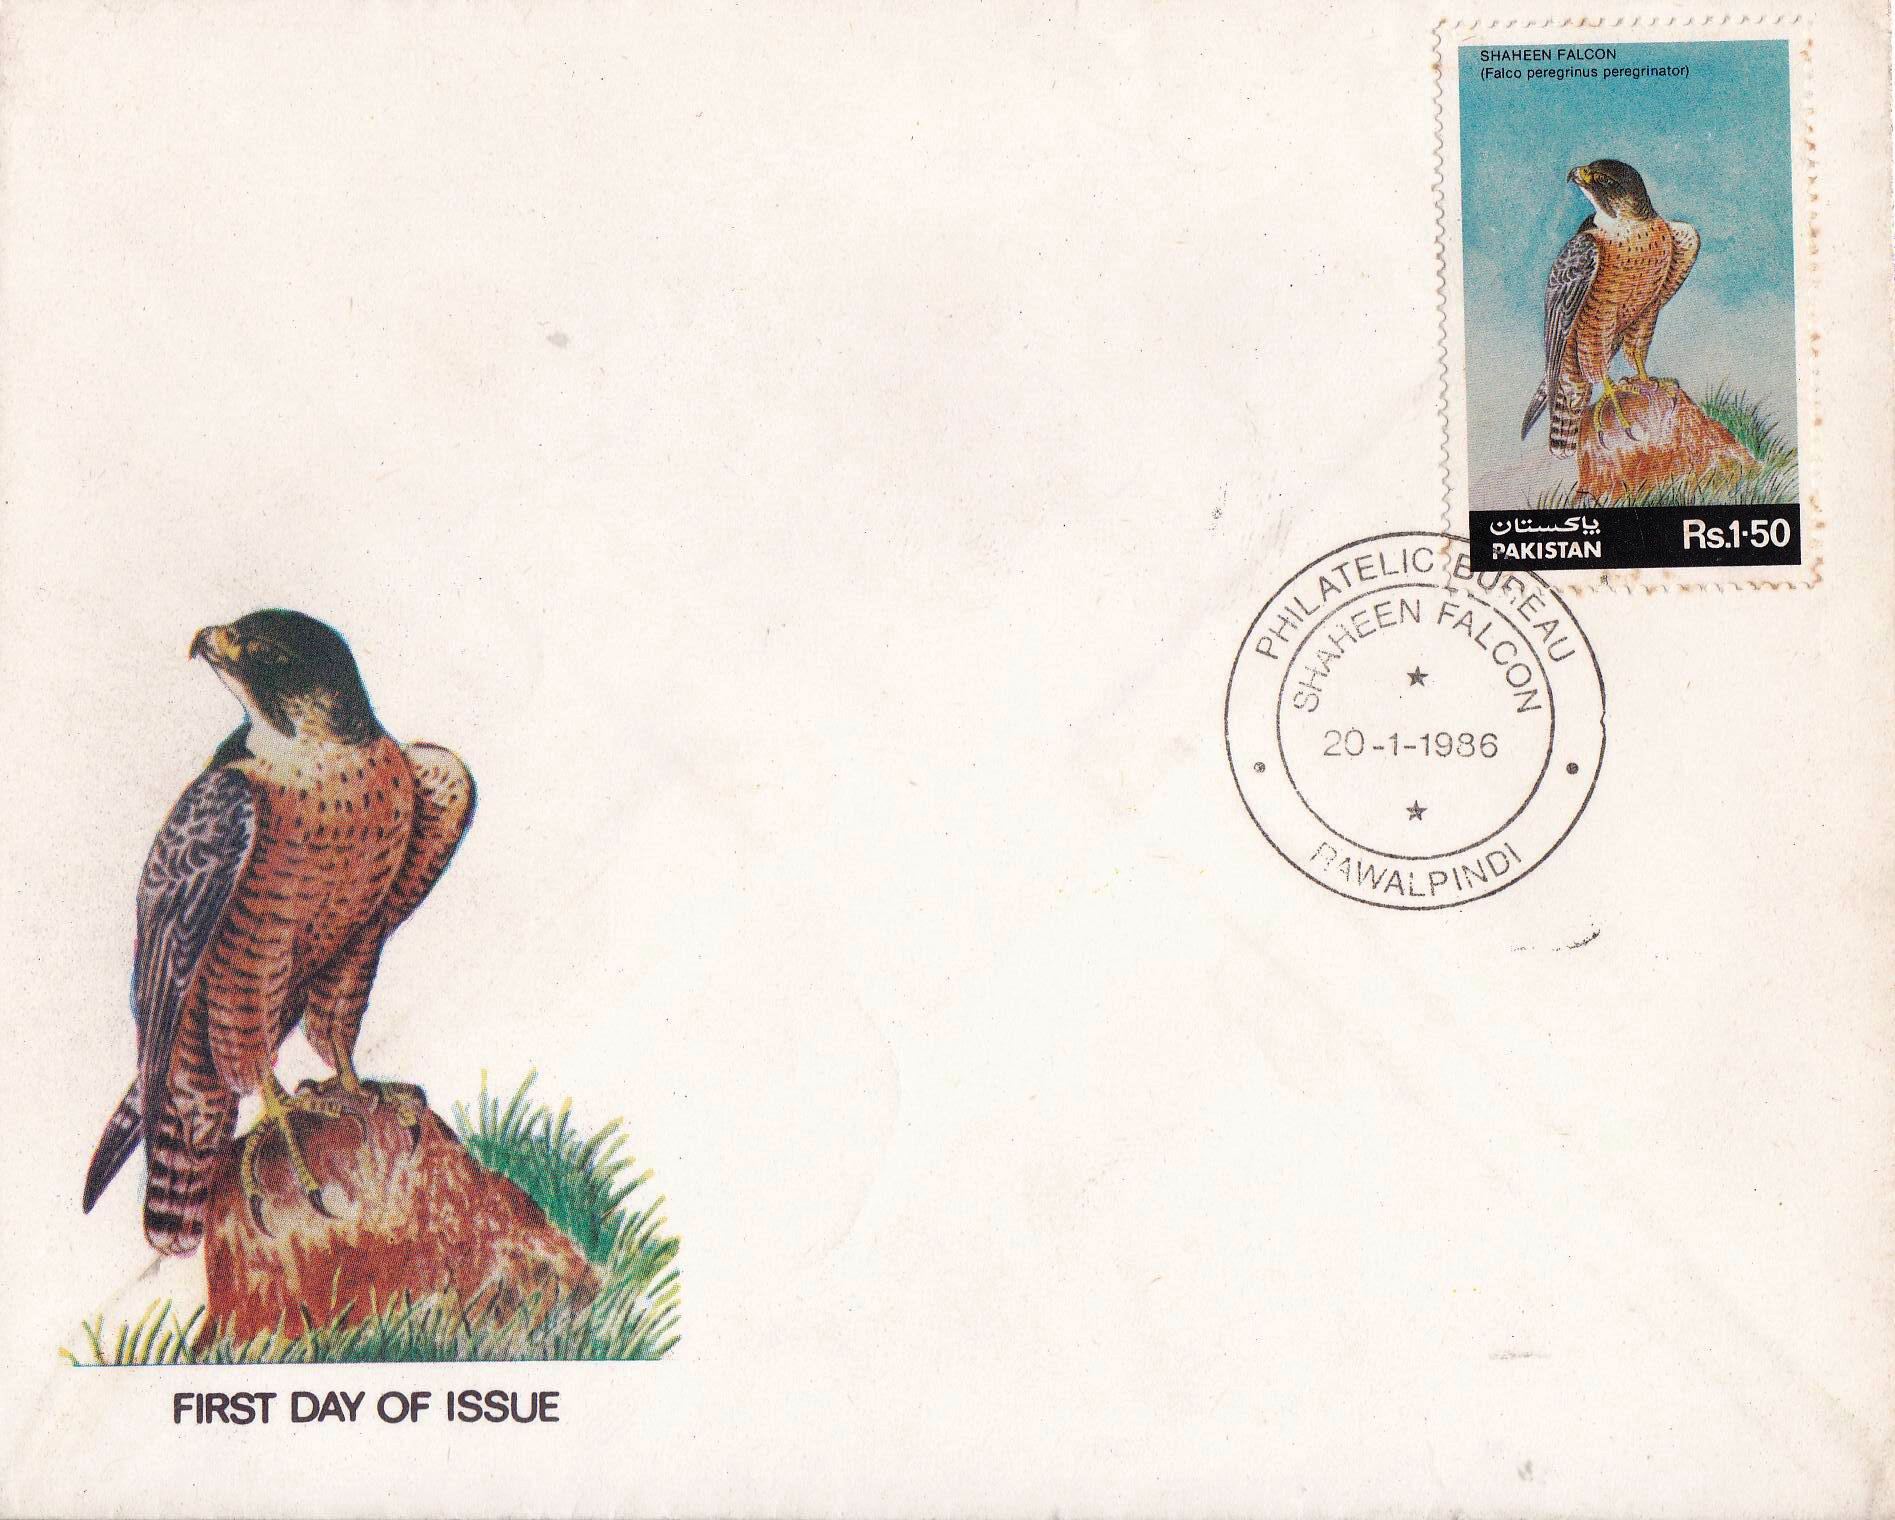 Pakistan Fdc 1986 Brochure & Stamp Shaheen Falcon - Click Image to Close